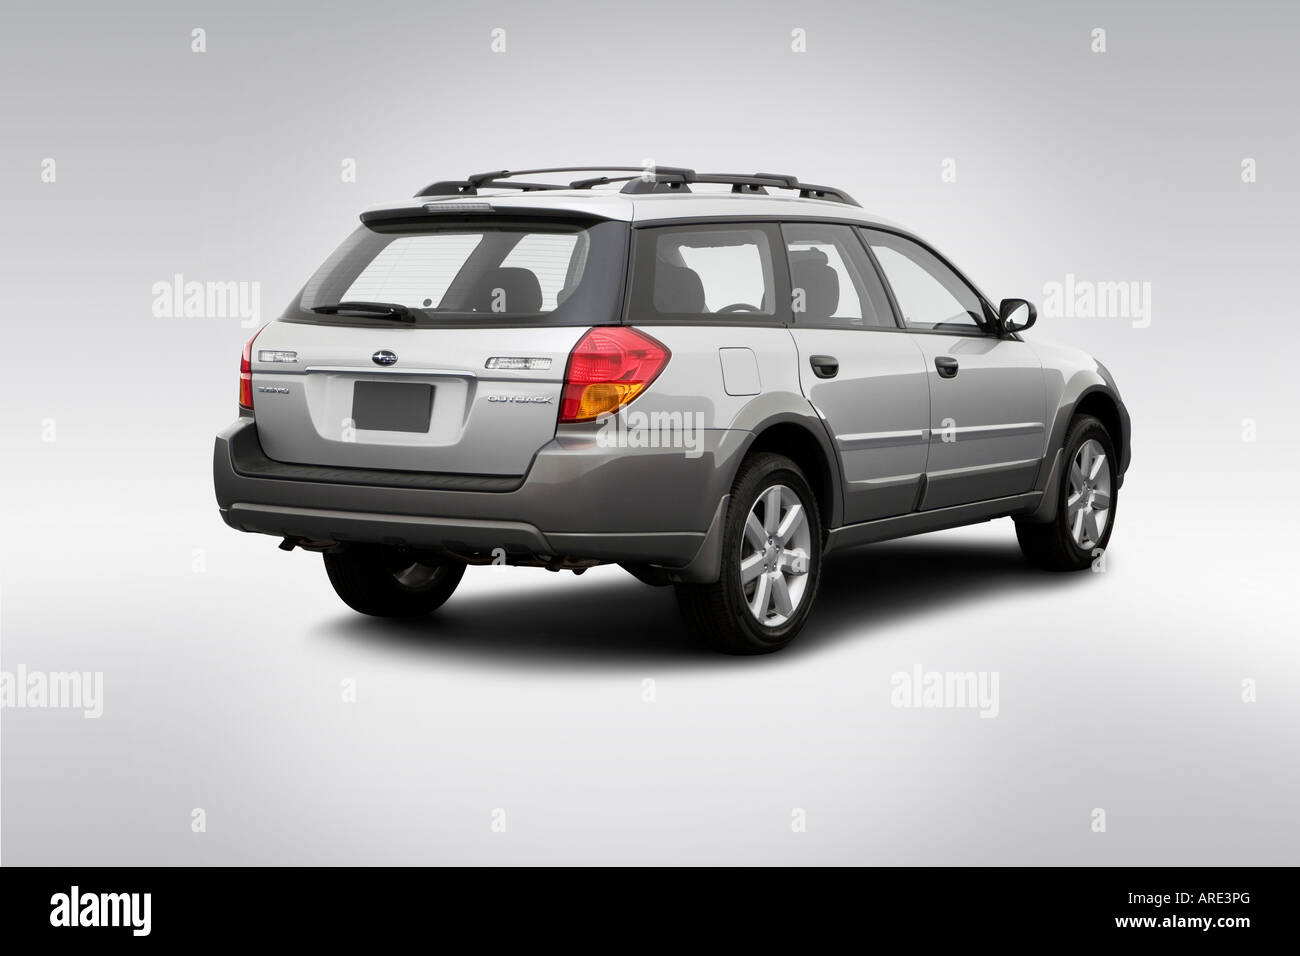 2006 Subaru Outback 2.5i in Silver - Rear angle view Stock Photo - Alamy